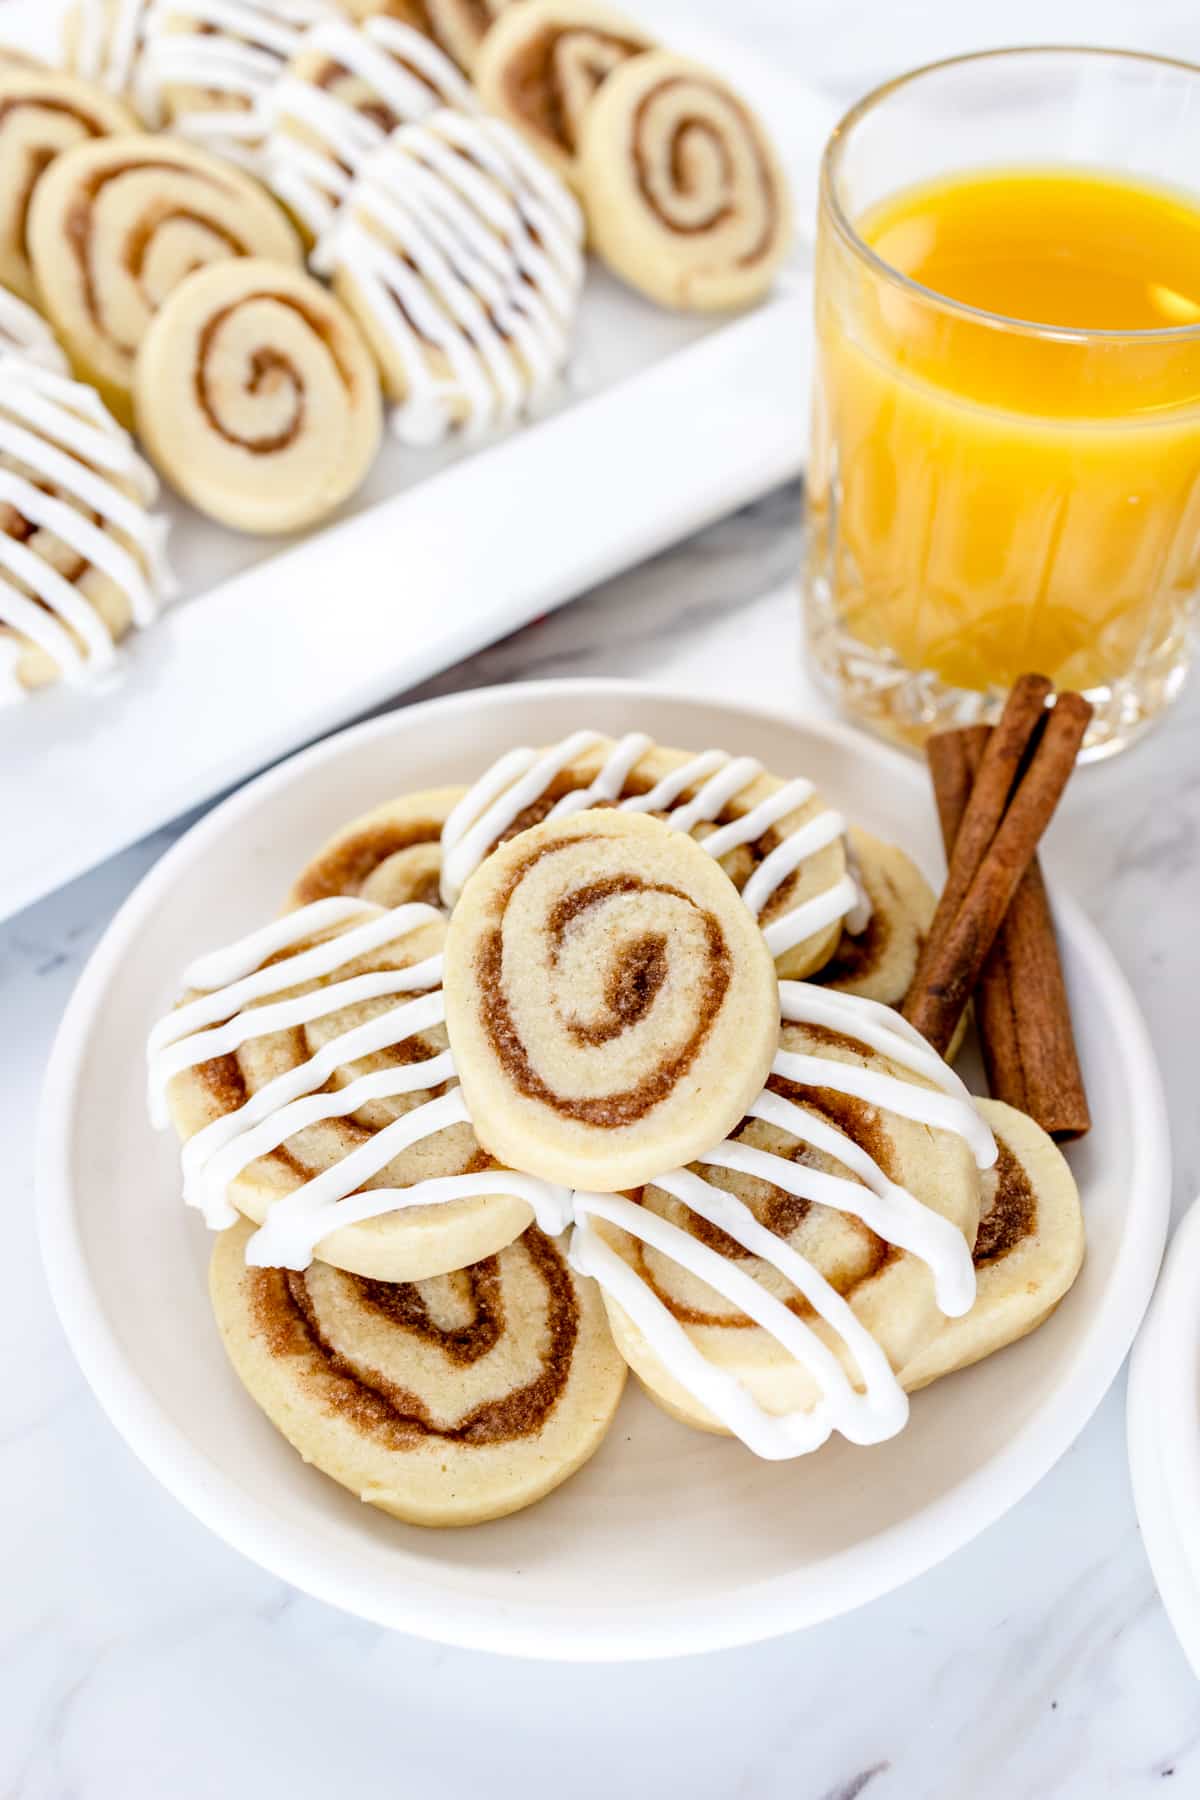 A plate filled with cinnamon roll cookies next to a glass of orange juice. 